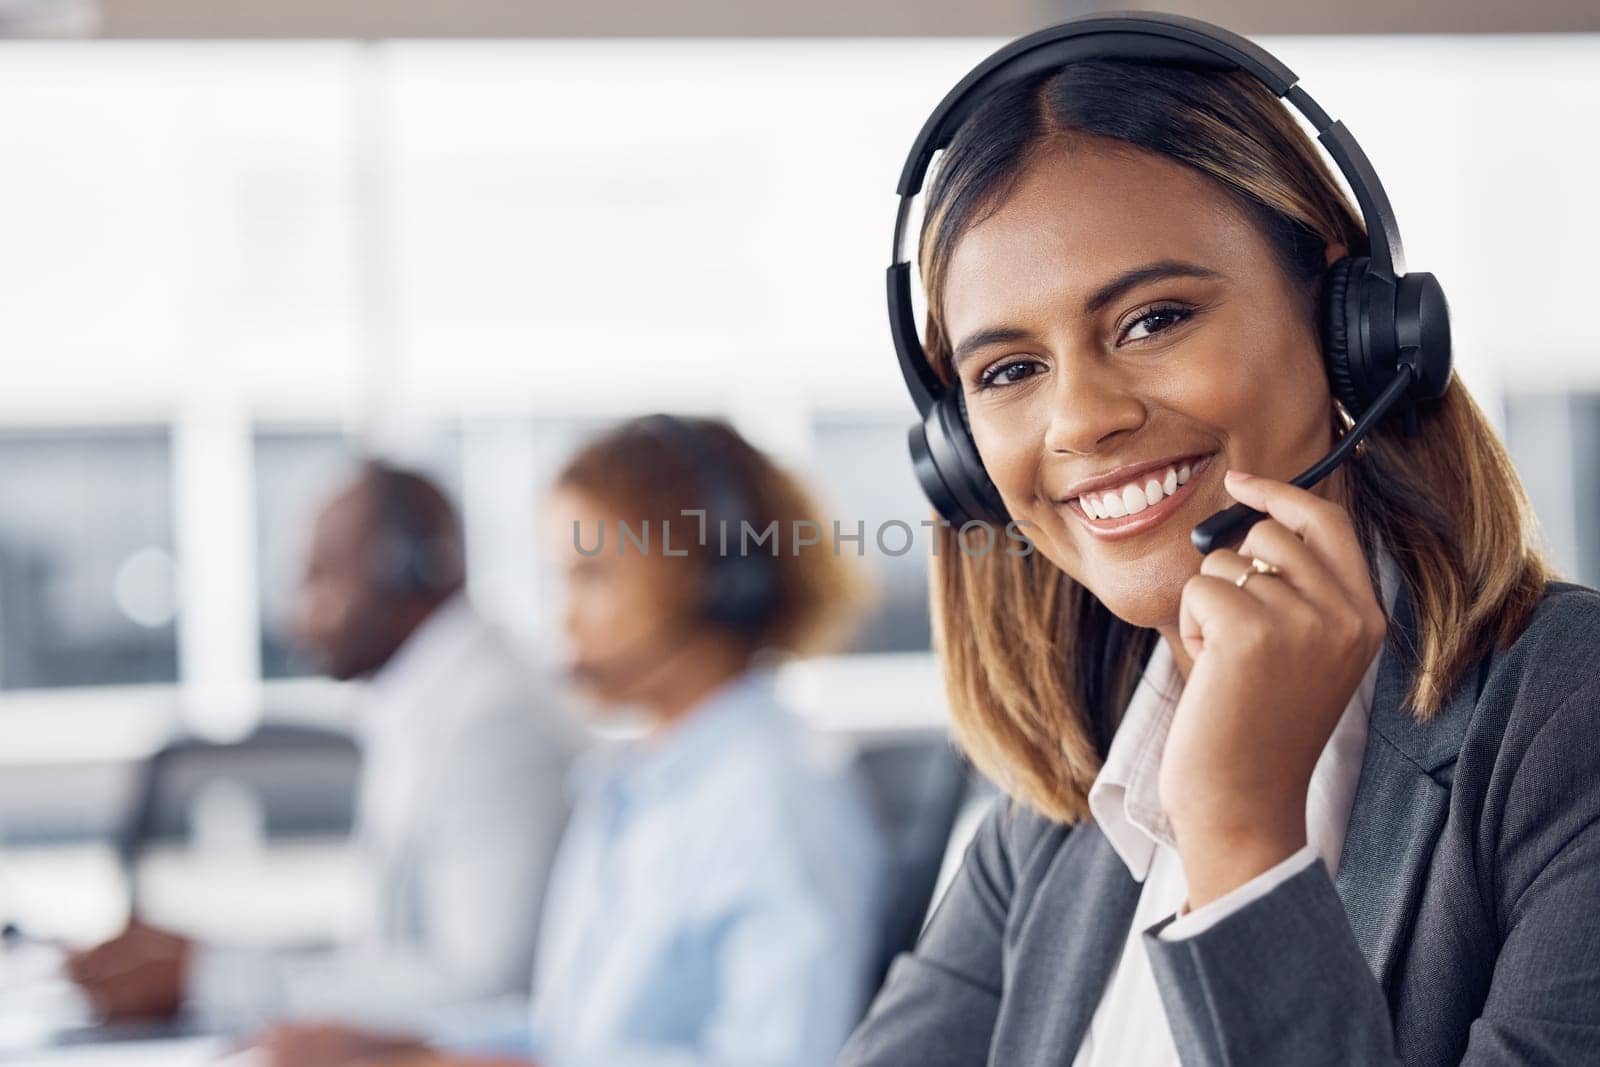 Woman, call center and smile with headset mic for telemarketing, customer service or support at the office. Portrait of happy female consultant agent smiling with headphones for online advice or help.